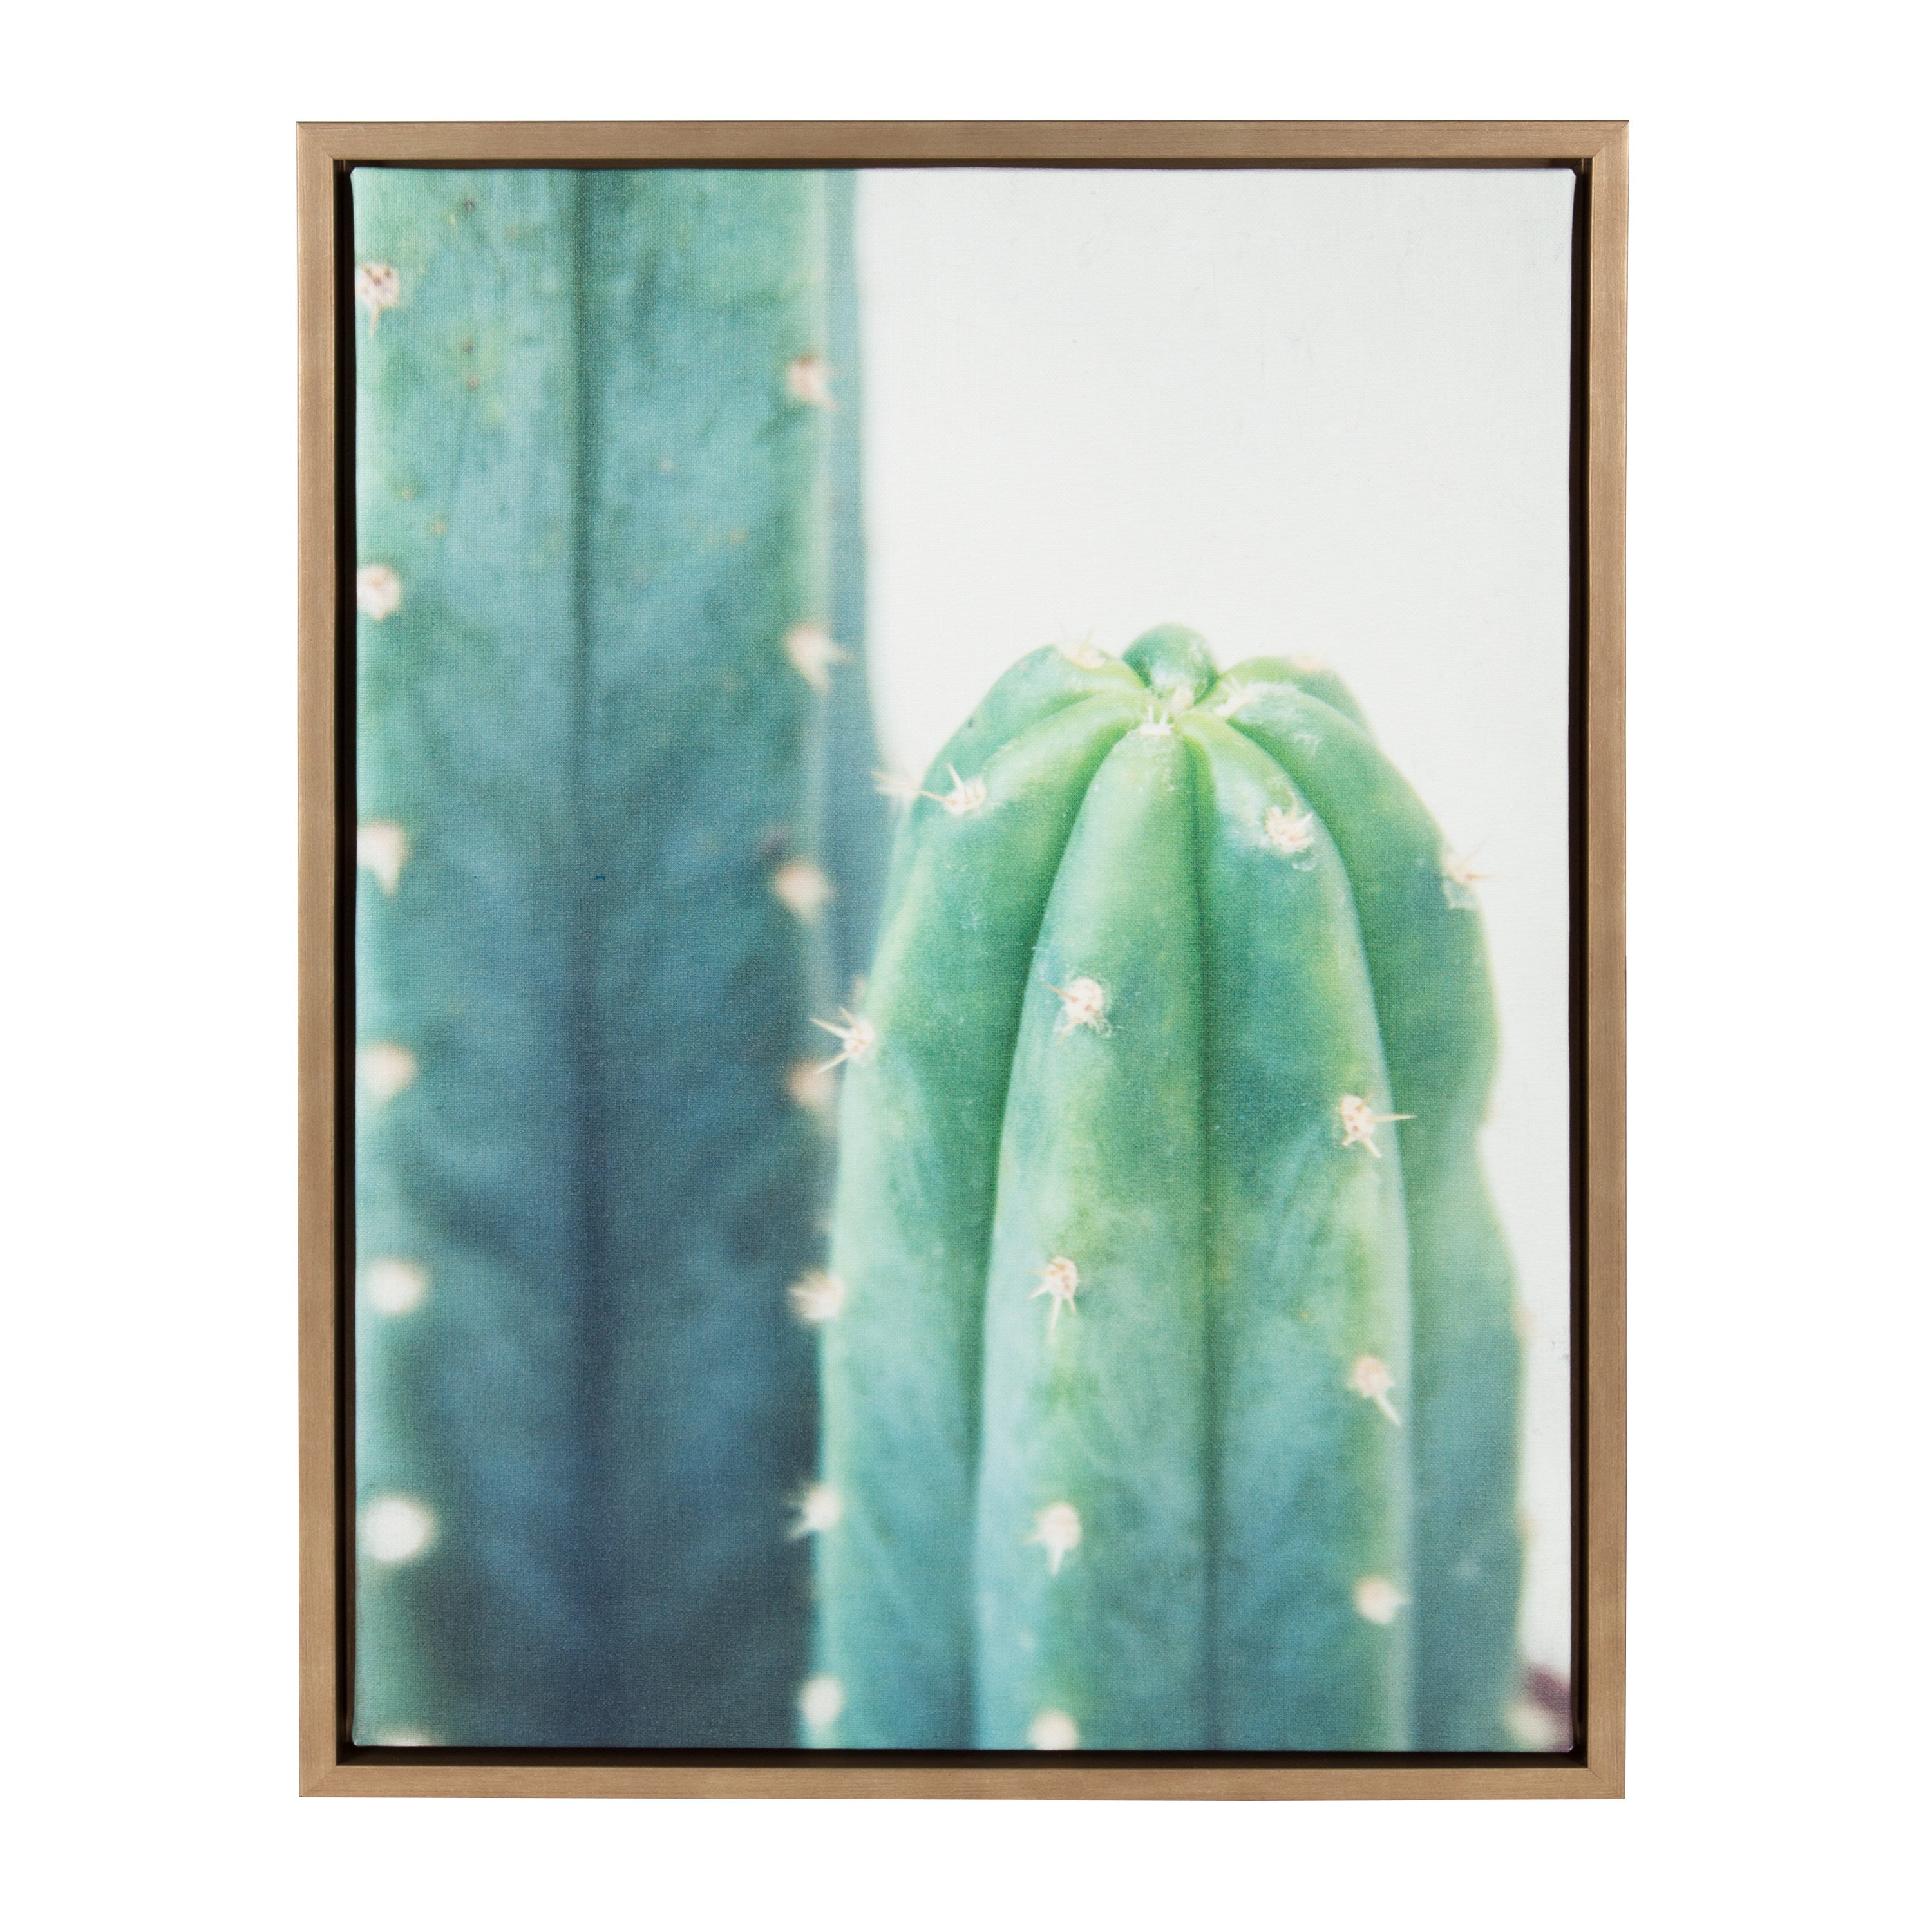 Sylvie Cactus Framed Canvas by F2 Images